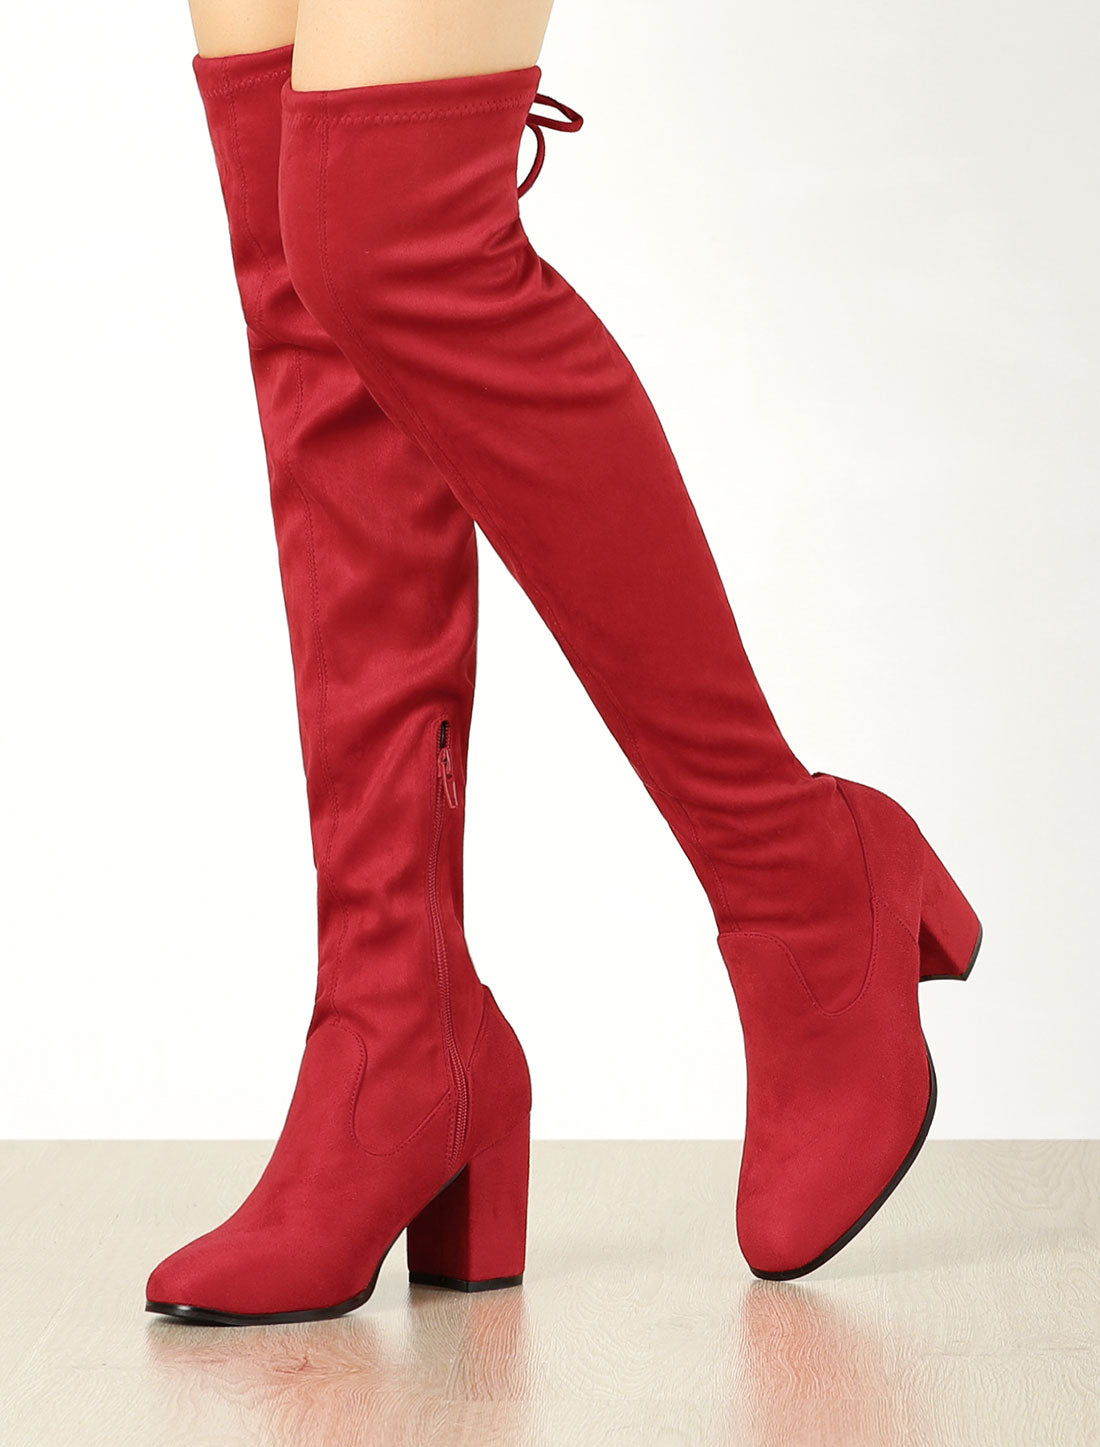 Allegra K Round Toe Chunky Heel Over the Knee High Boots